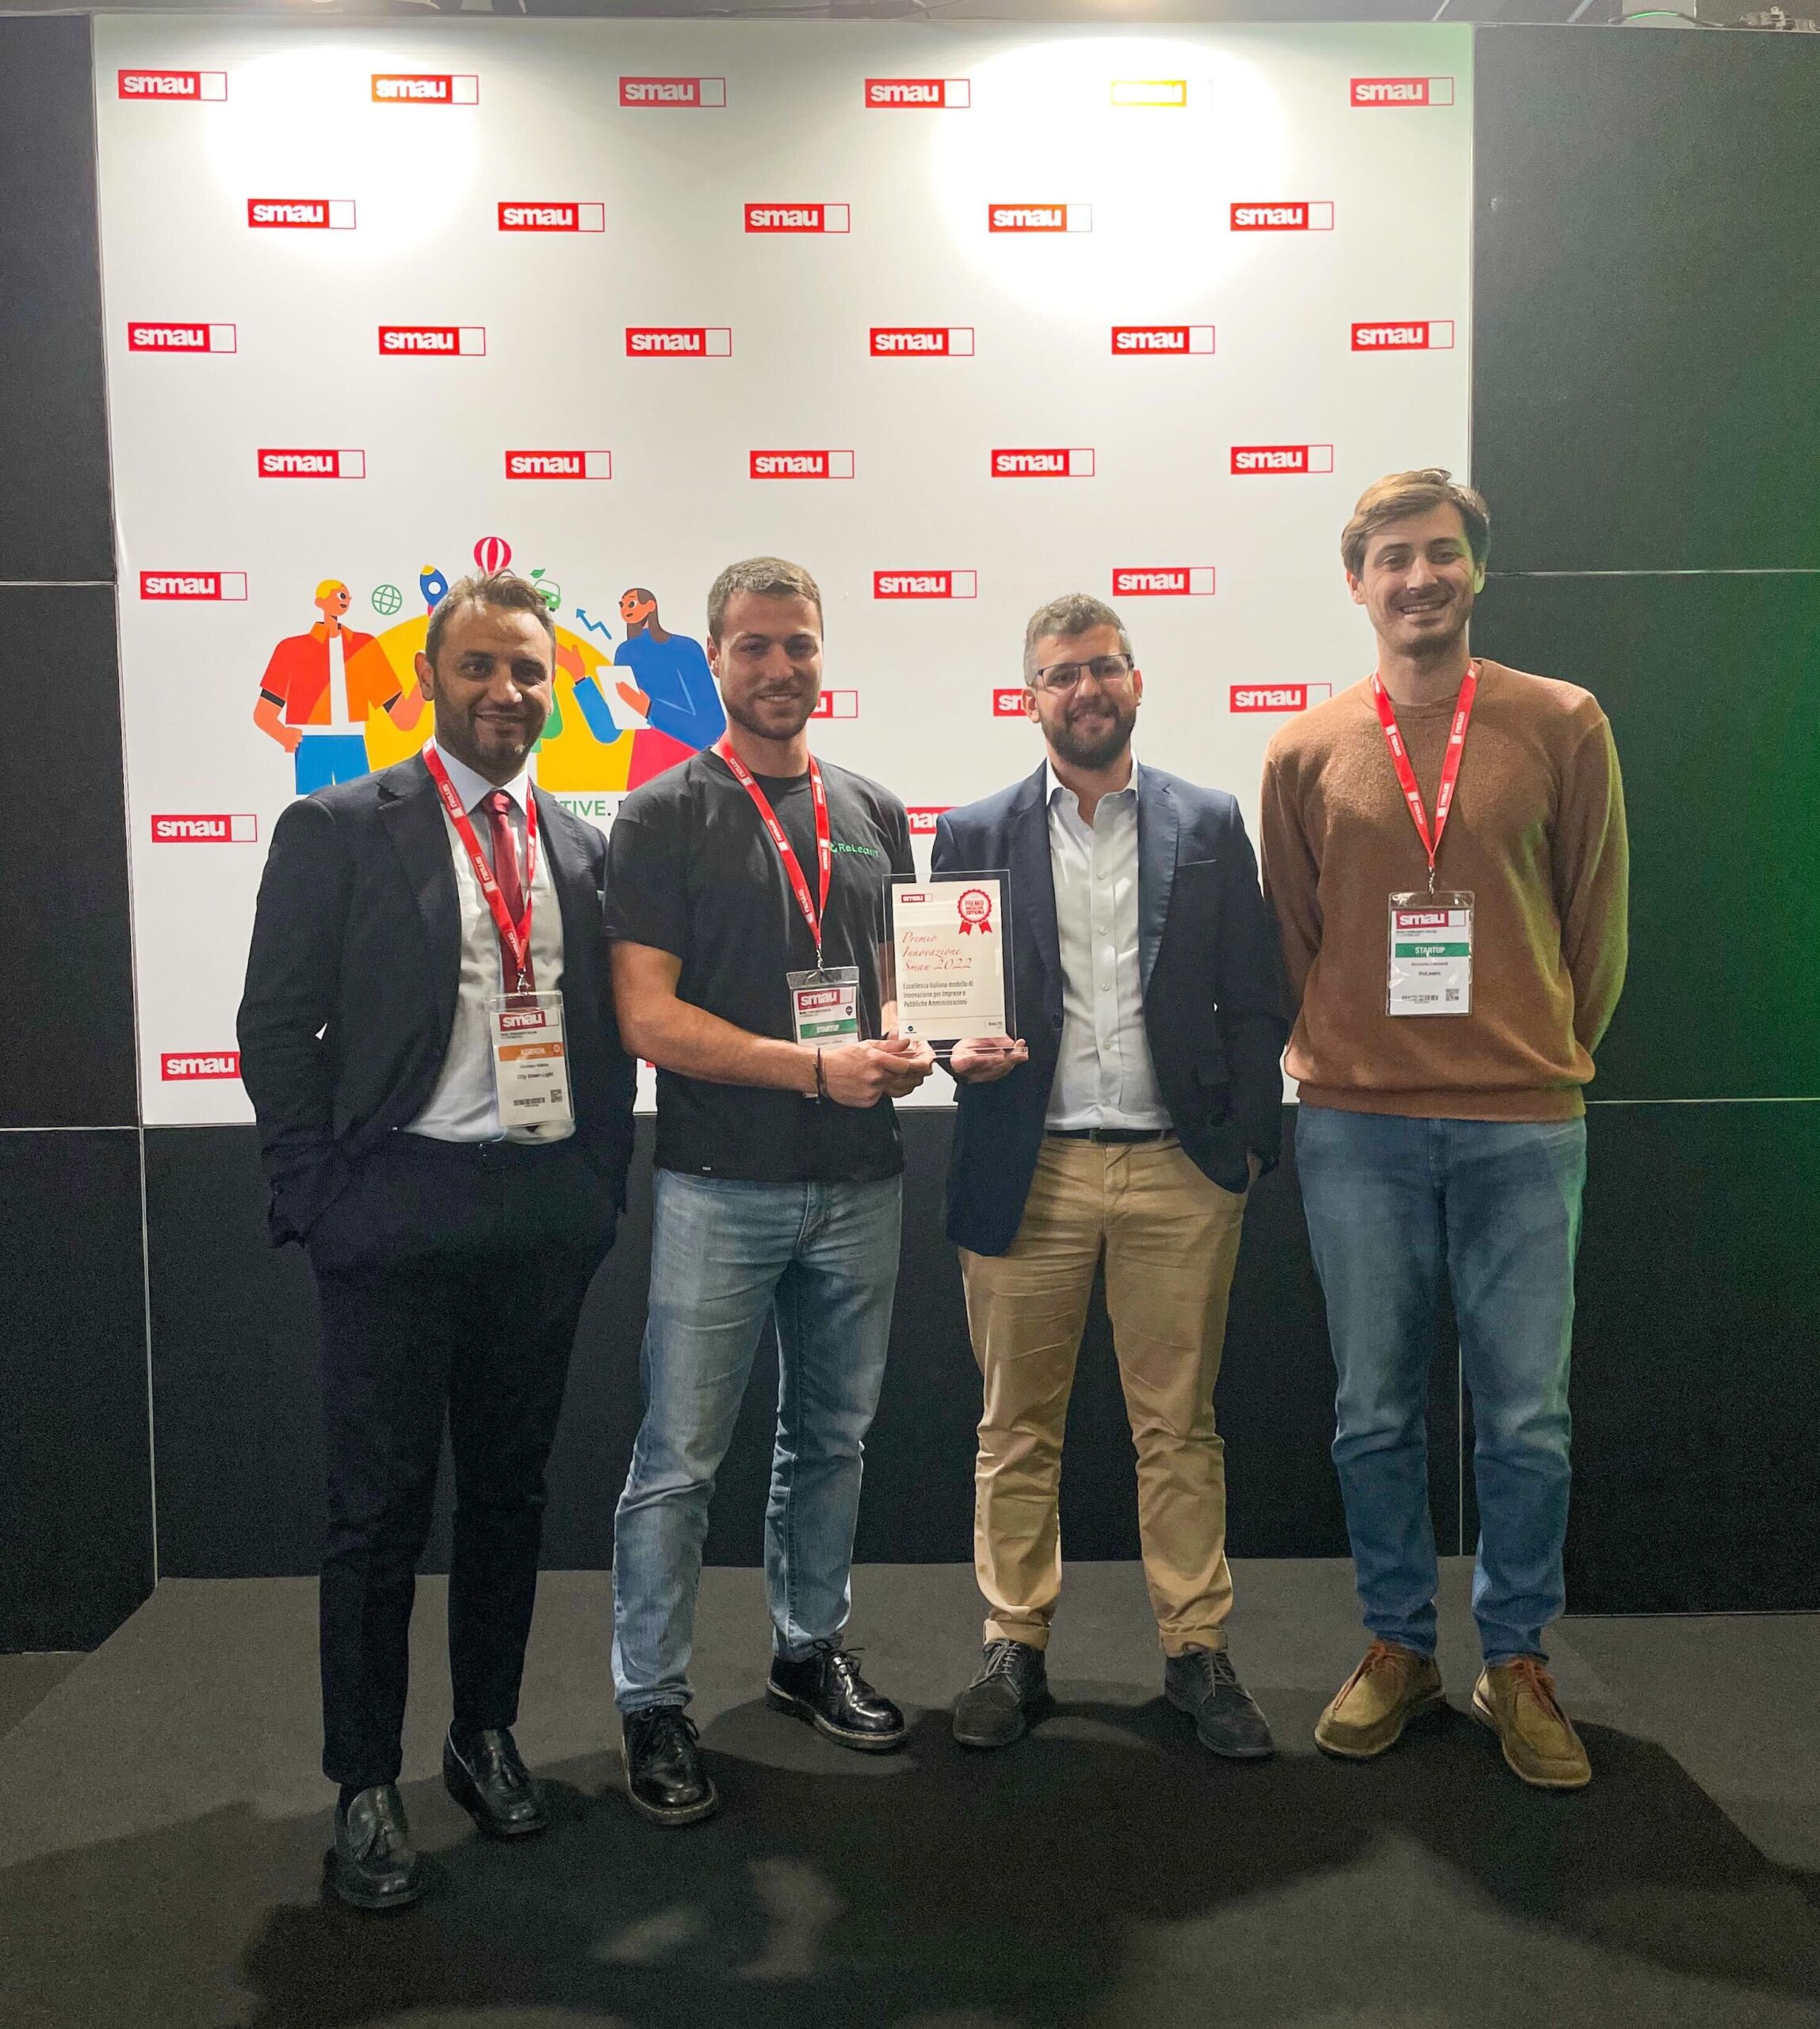 ReLearn wins the SMAU Innovation Award together with City Green Light